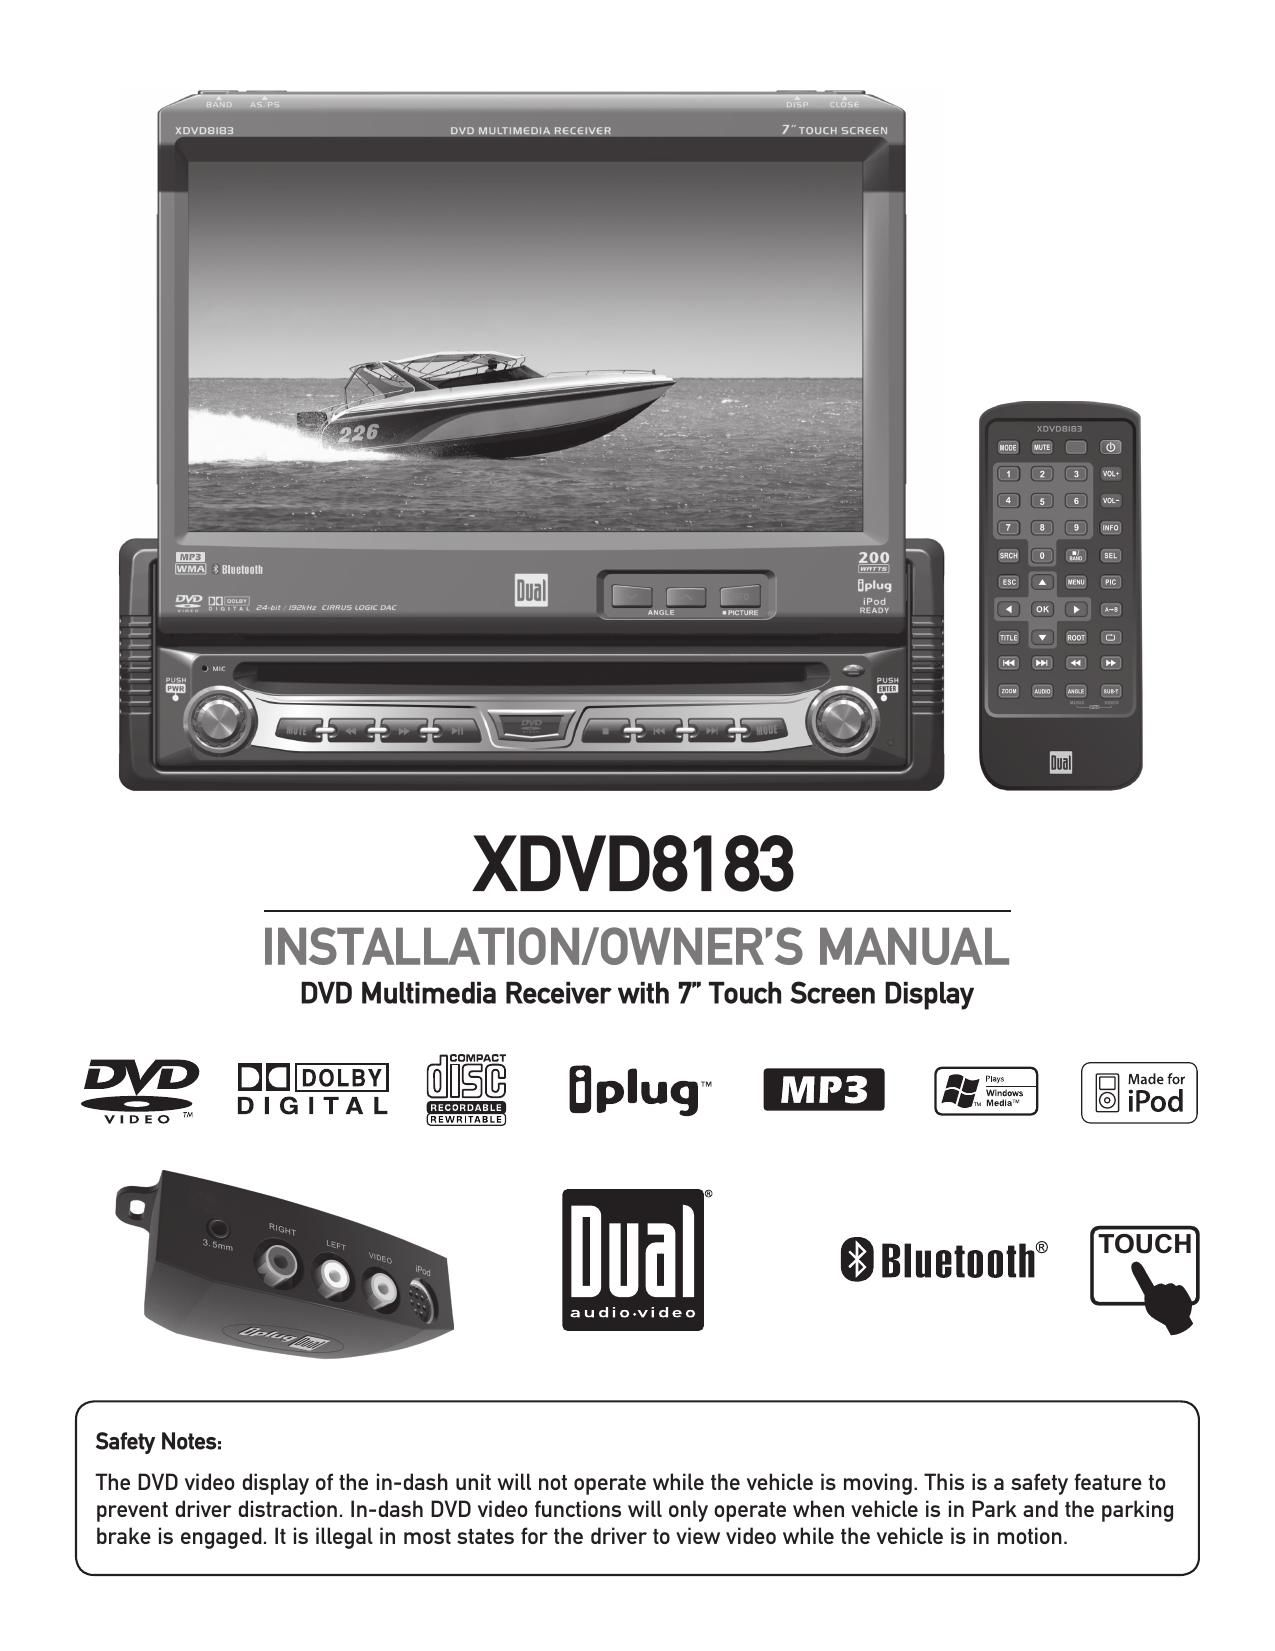 Dual XDVD 8183 Owners Manual